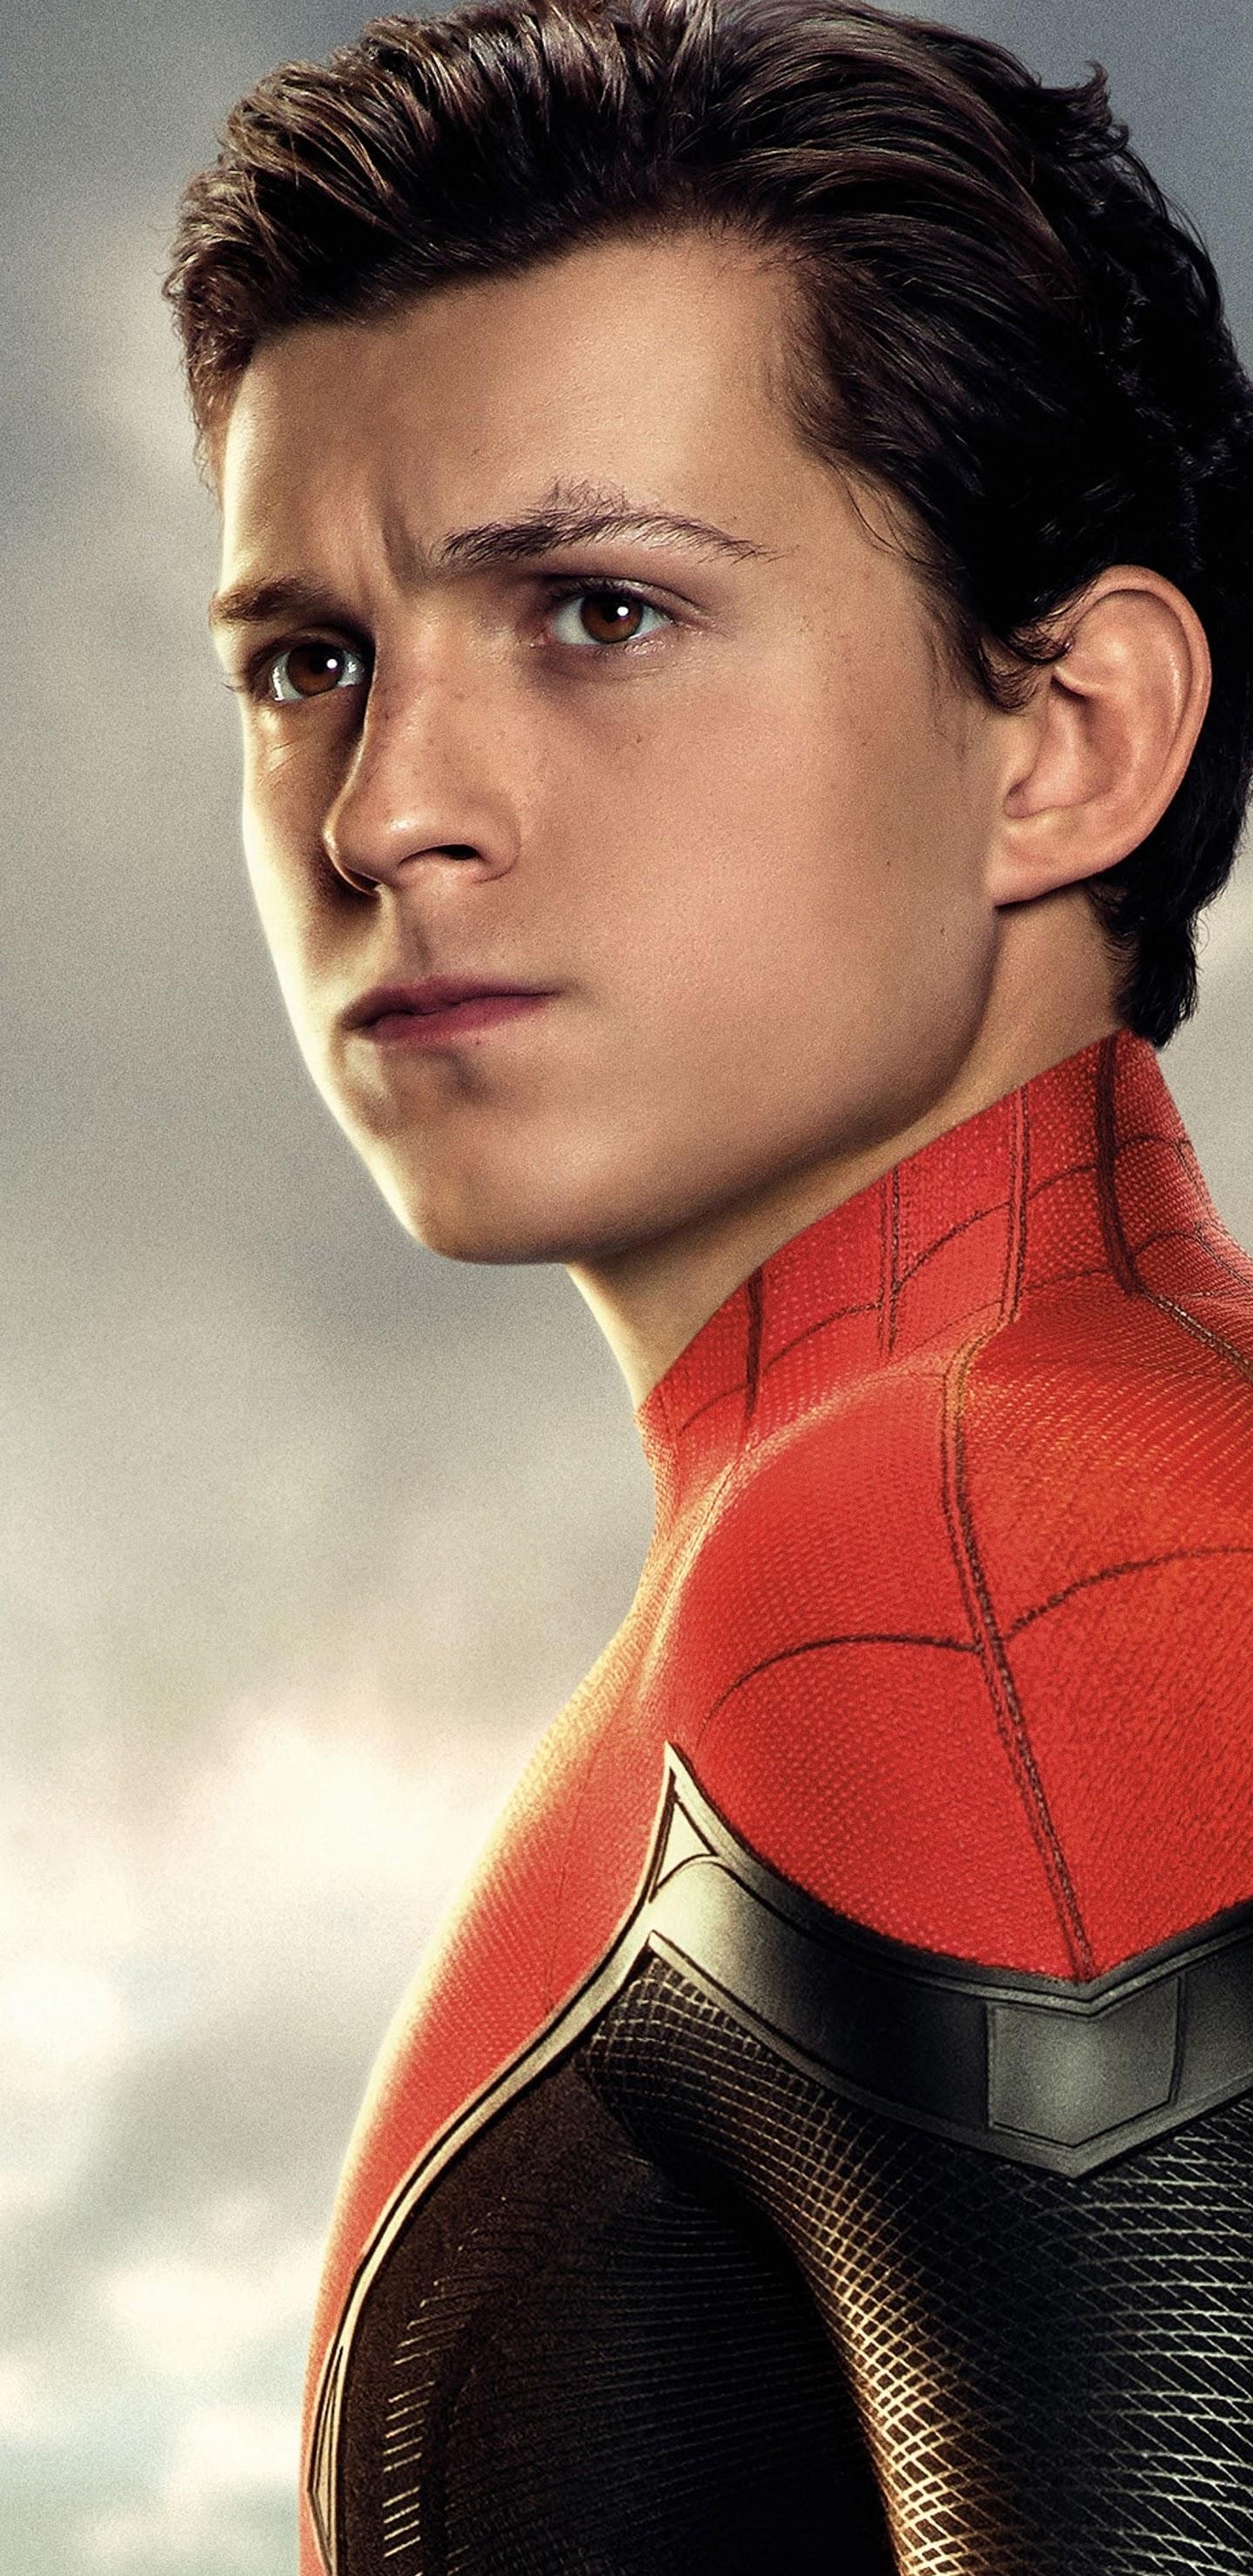 Spider Man Far From Home Wallpaper